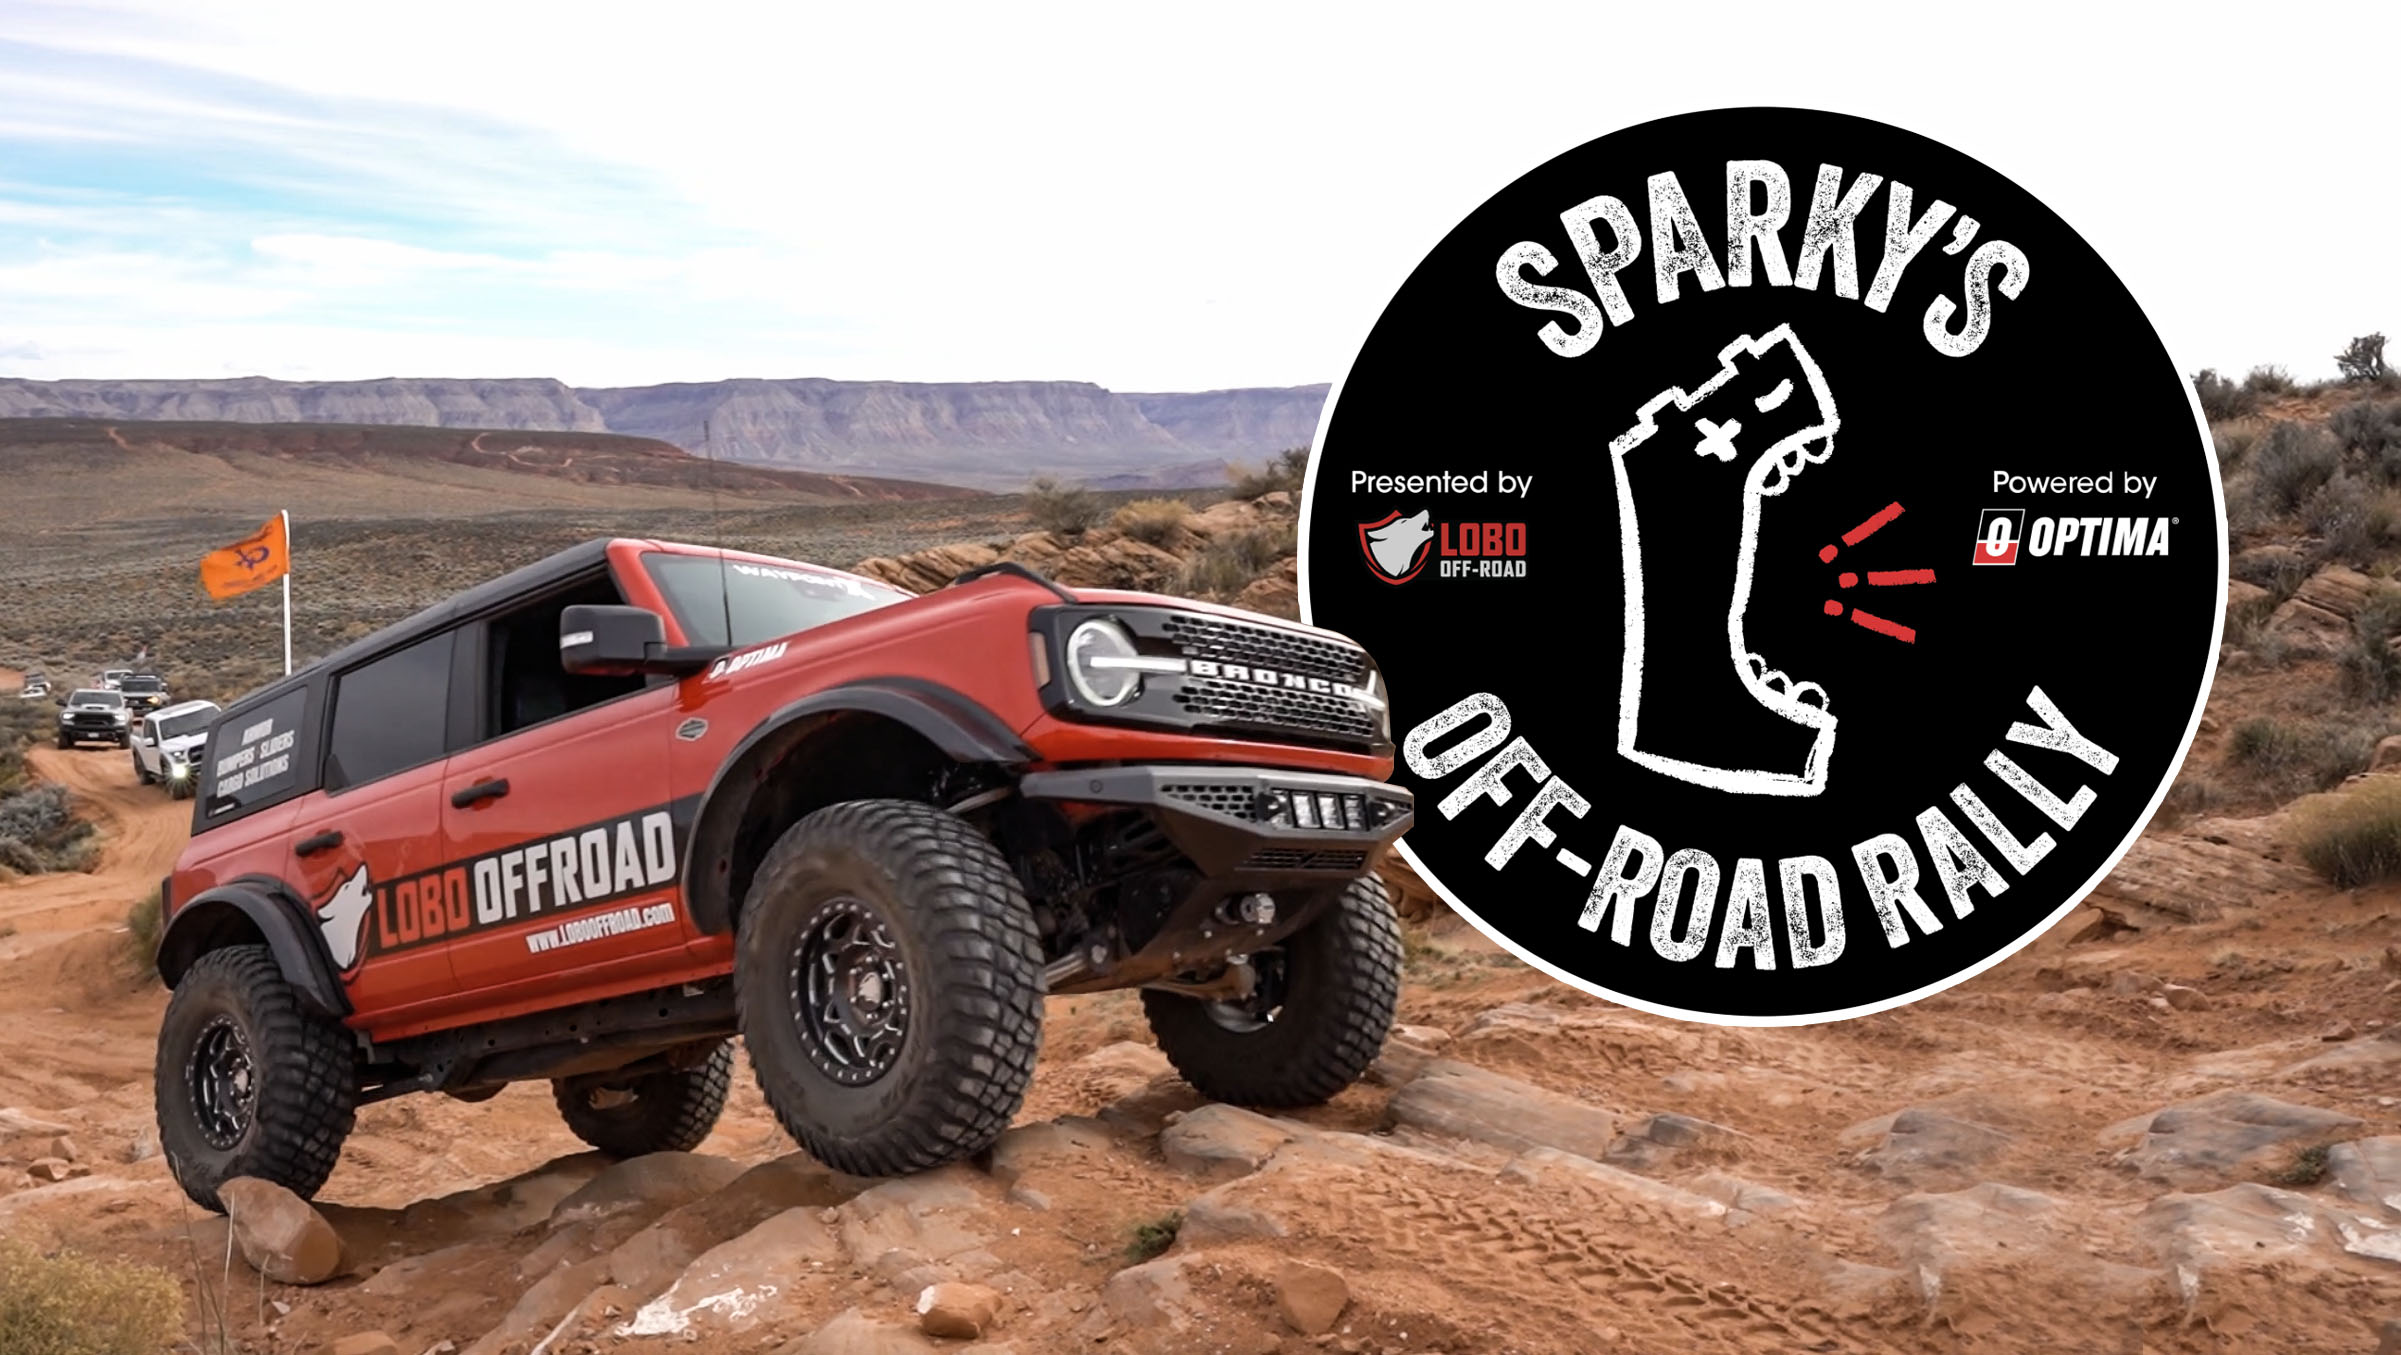 Ford Bronco Sparky's Off-Road Rally at KOH - Powered by OPTIMA/ Presented by Lobo Off-Road! (January 28, 2024) sparkysthumb